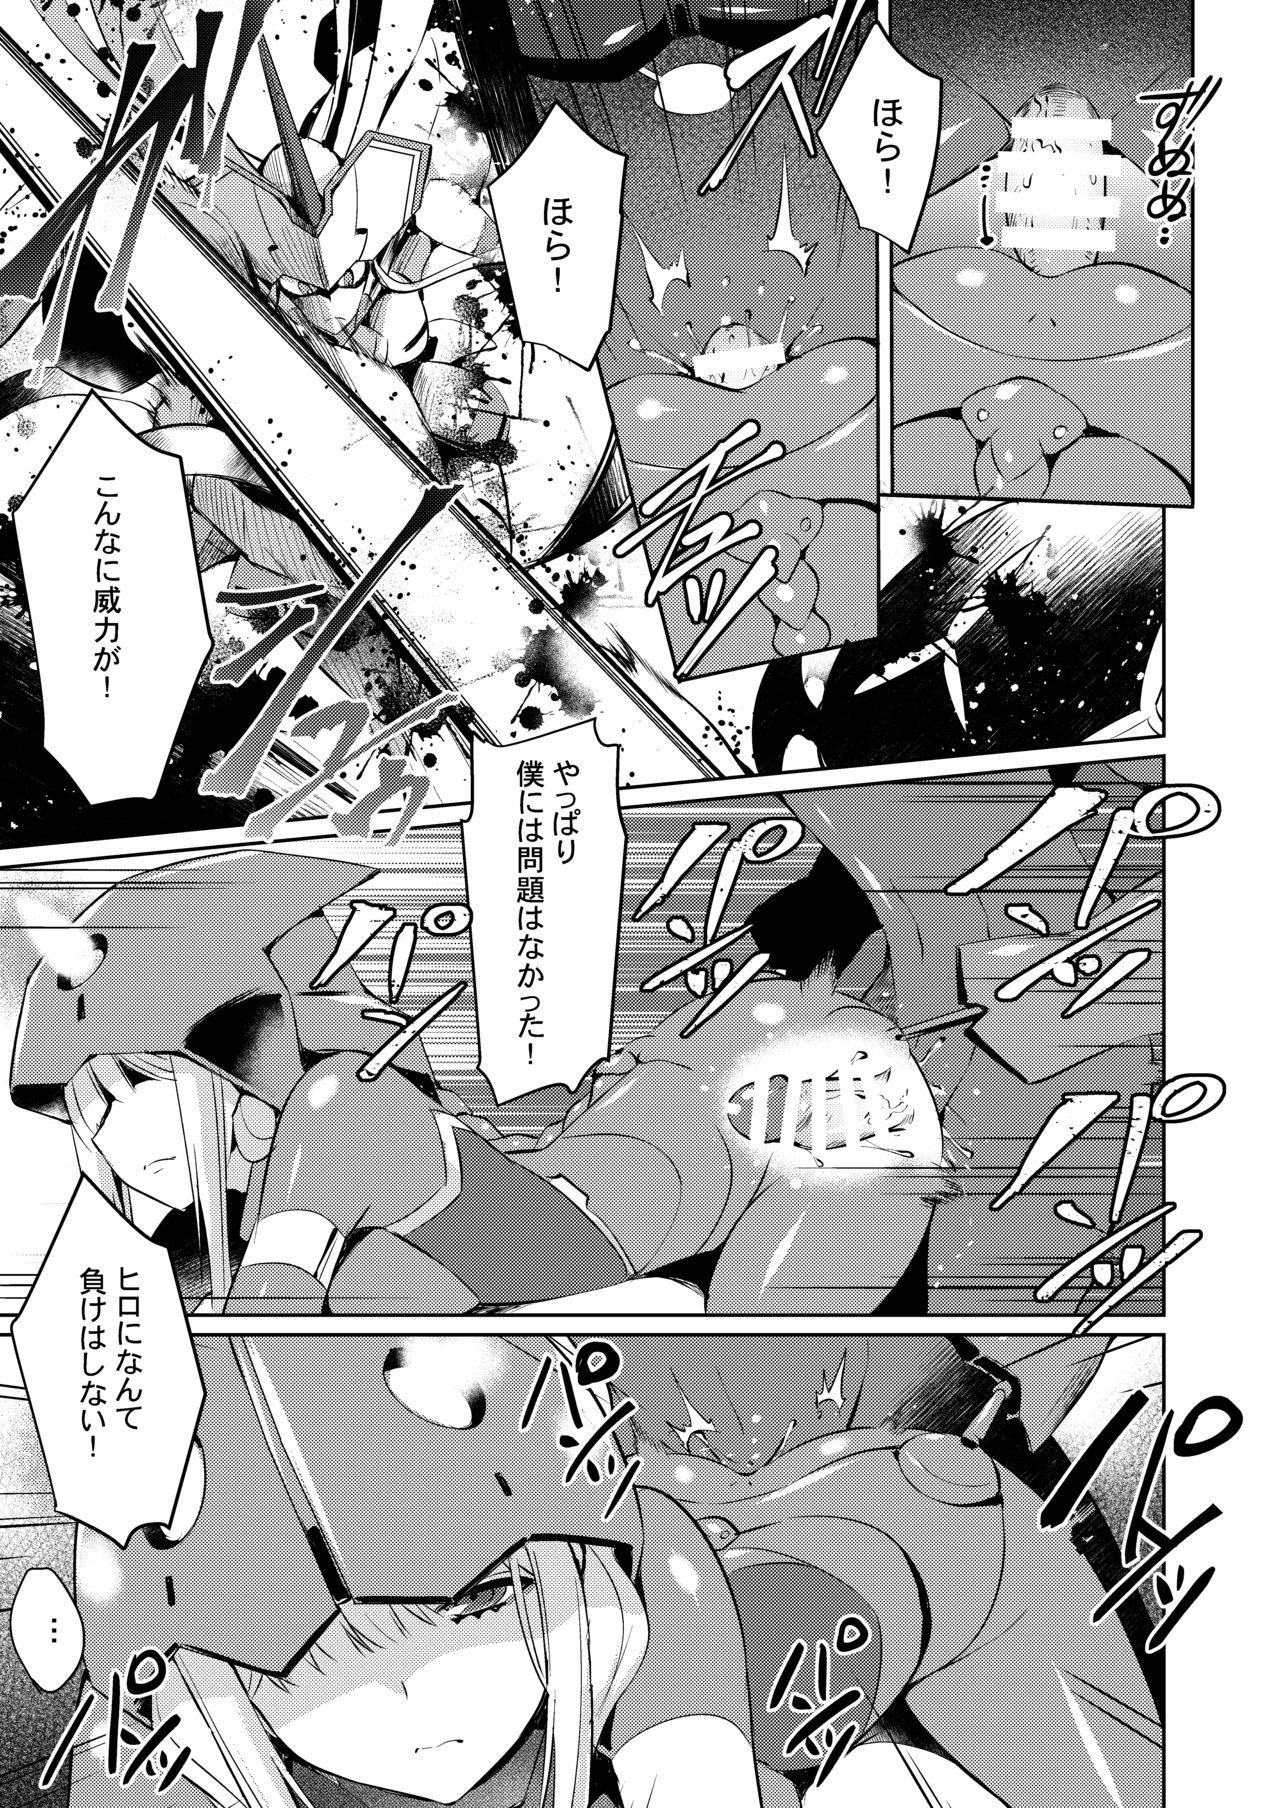 Tattoo Mitsuru in the Zero Two - Darling in the franxx Spooning - Page 9